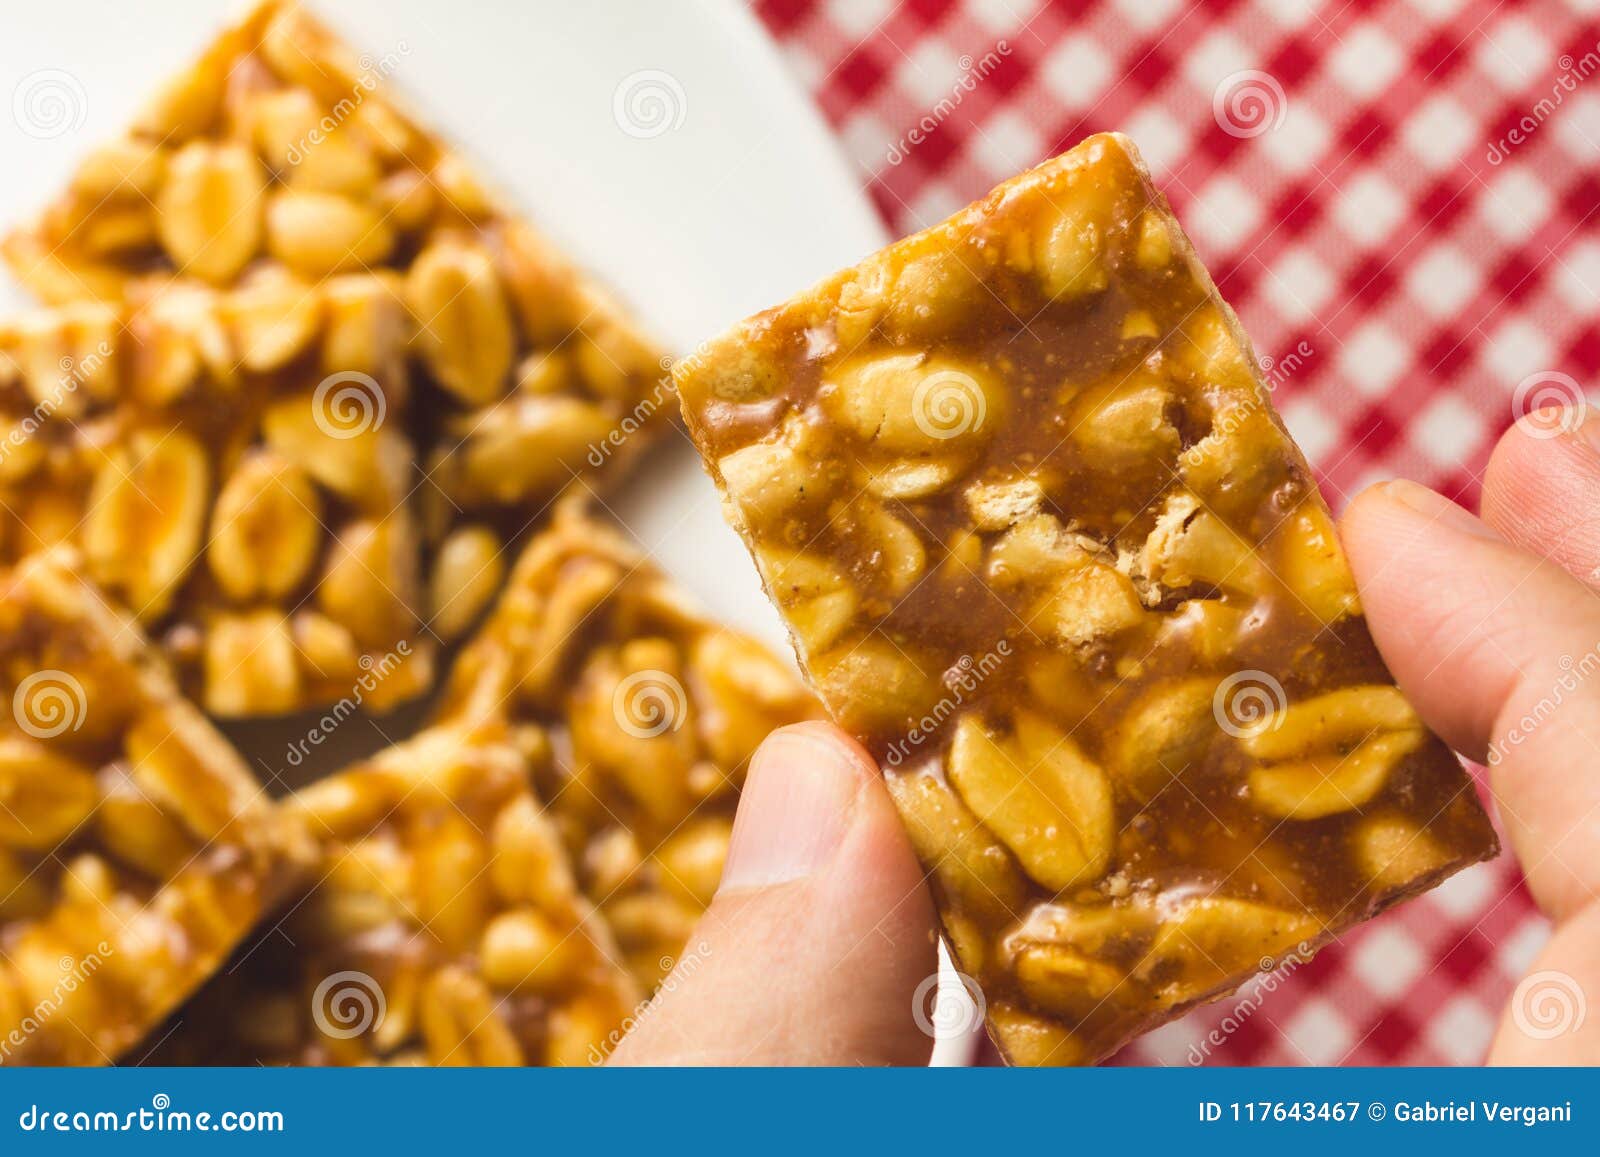 candy with peanut: pe de moleque in brazil and chikki in india.